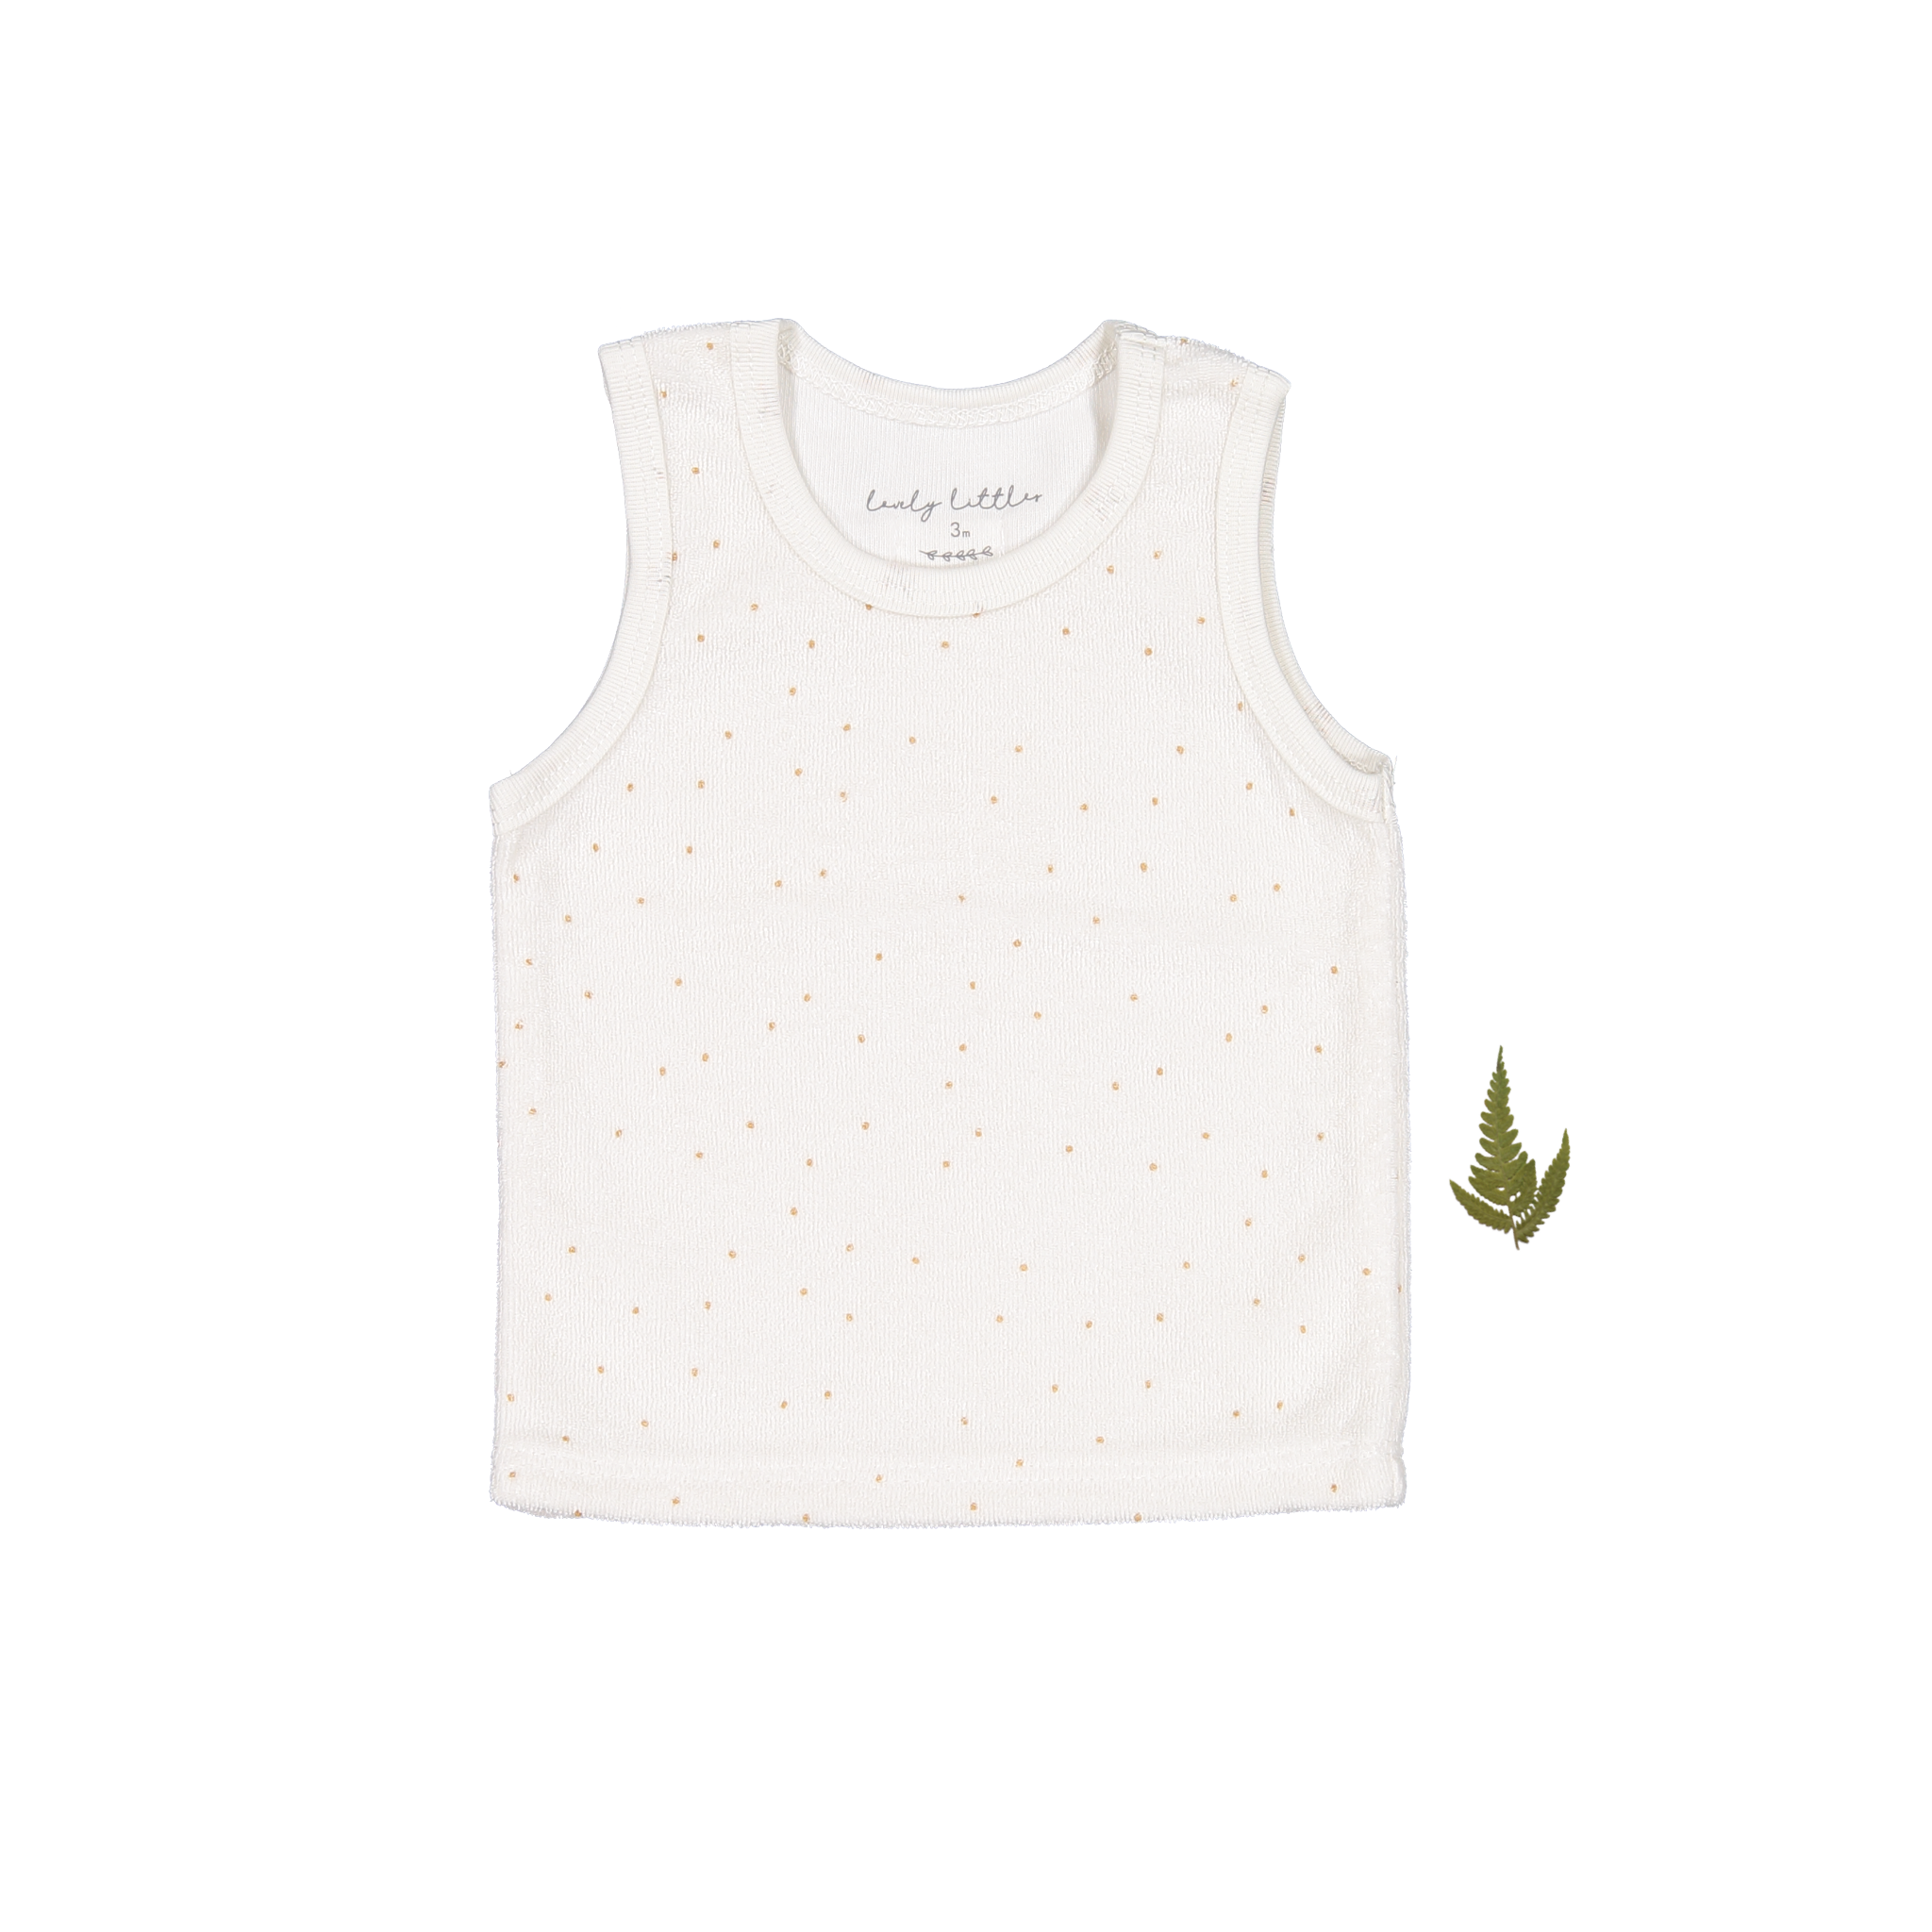 The Terry Tank - Pearl Dot